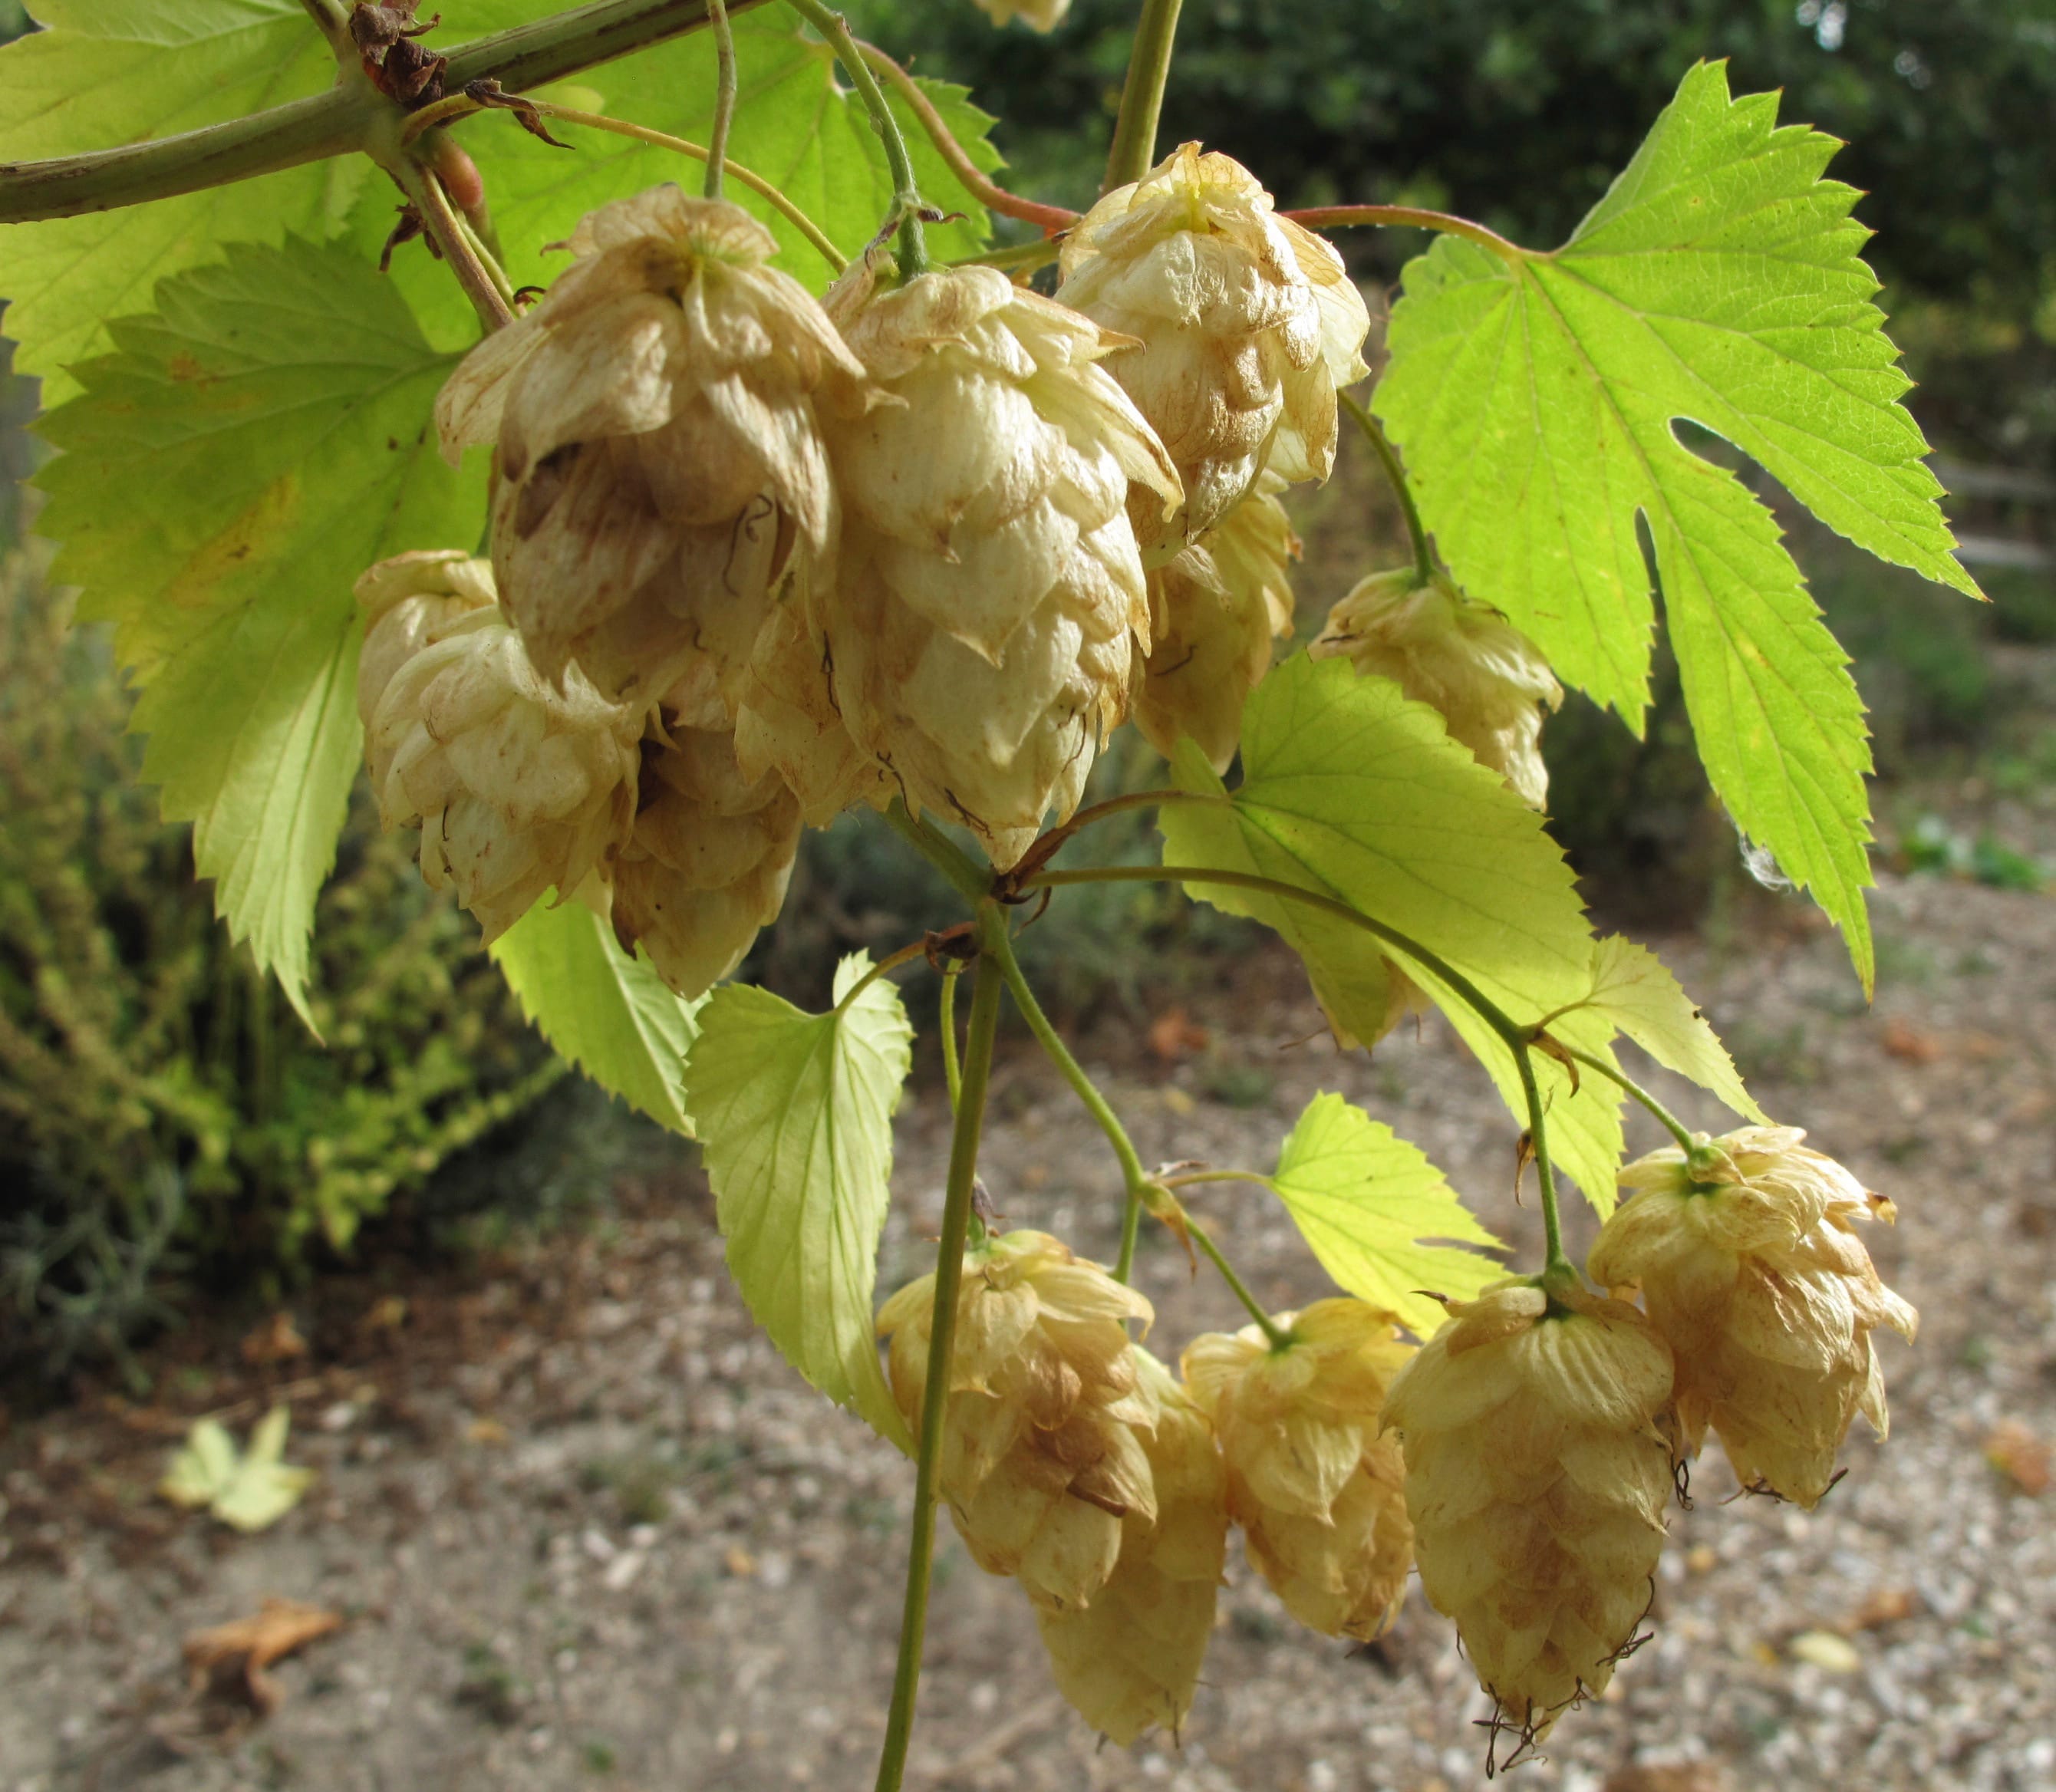 Hop harvests are in full swing in the Yakima Valley.